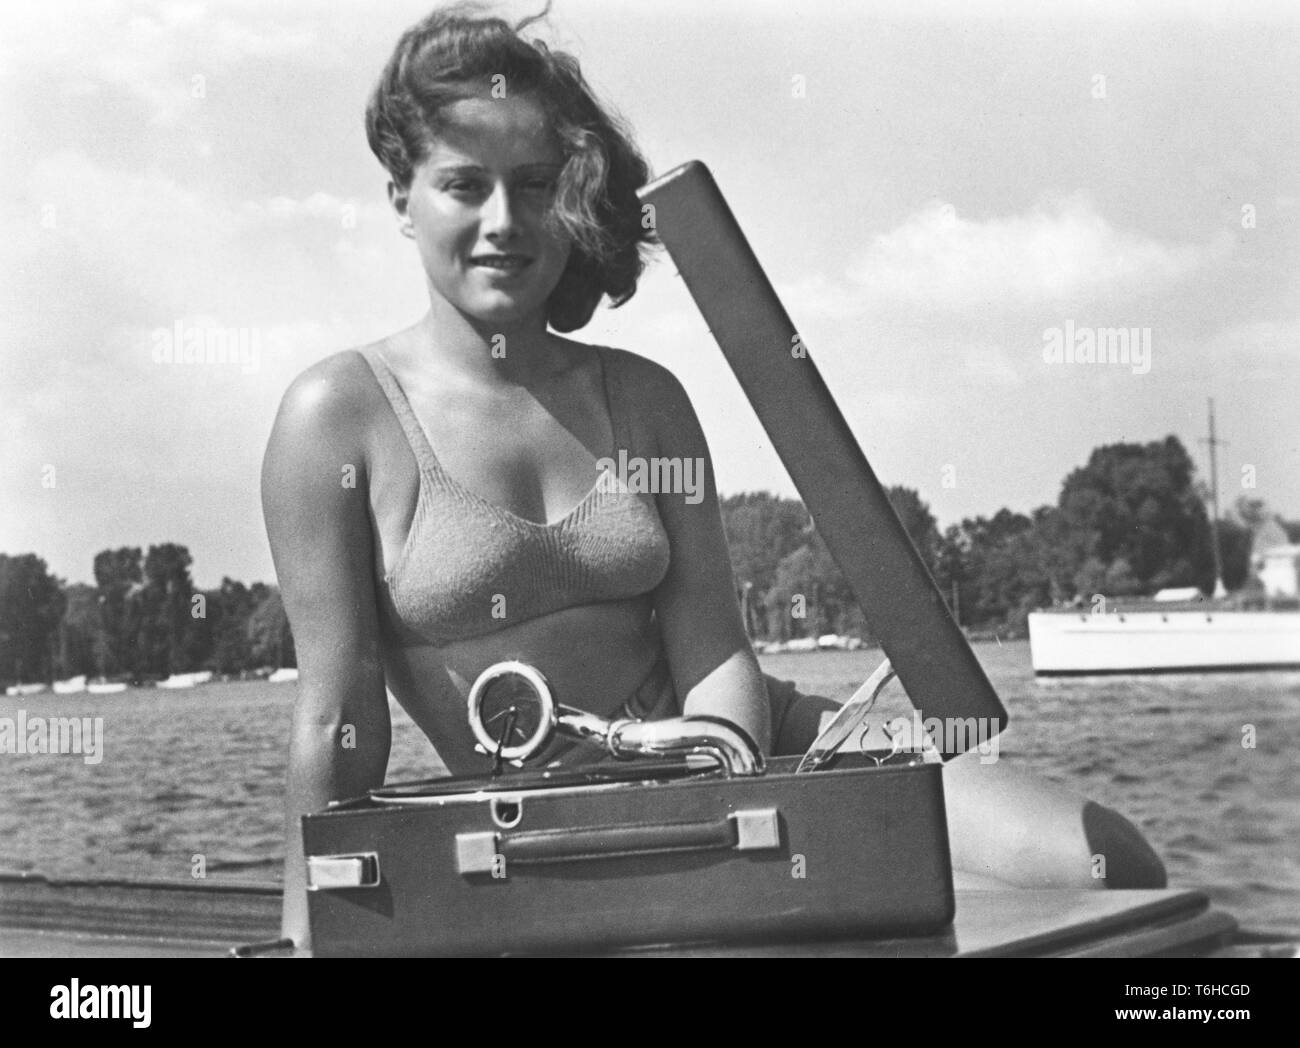 1940s summer lifestyle. A young woman with a portable gramophone player on a summer's day. It's operated by winding it up with a lever. The record then plays. When your hear that the recording begins to slow down, you know you have to wind i up again. The records were made of fragile material and the speed of the record to sound as it should was 78 revolutions per minute. Sweden 1940s. Stock Photo